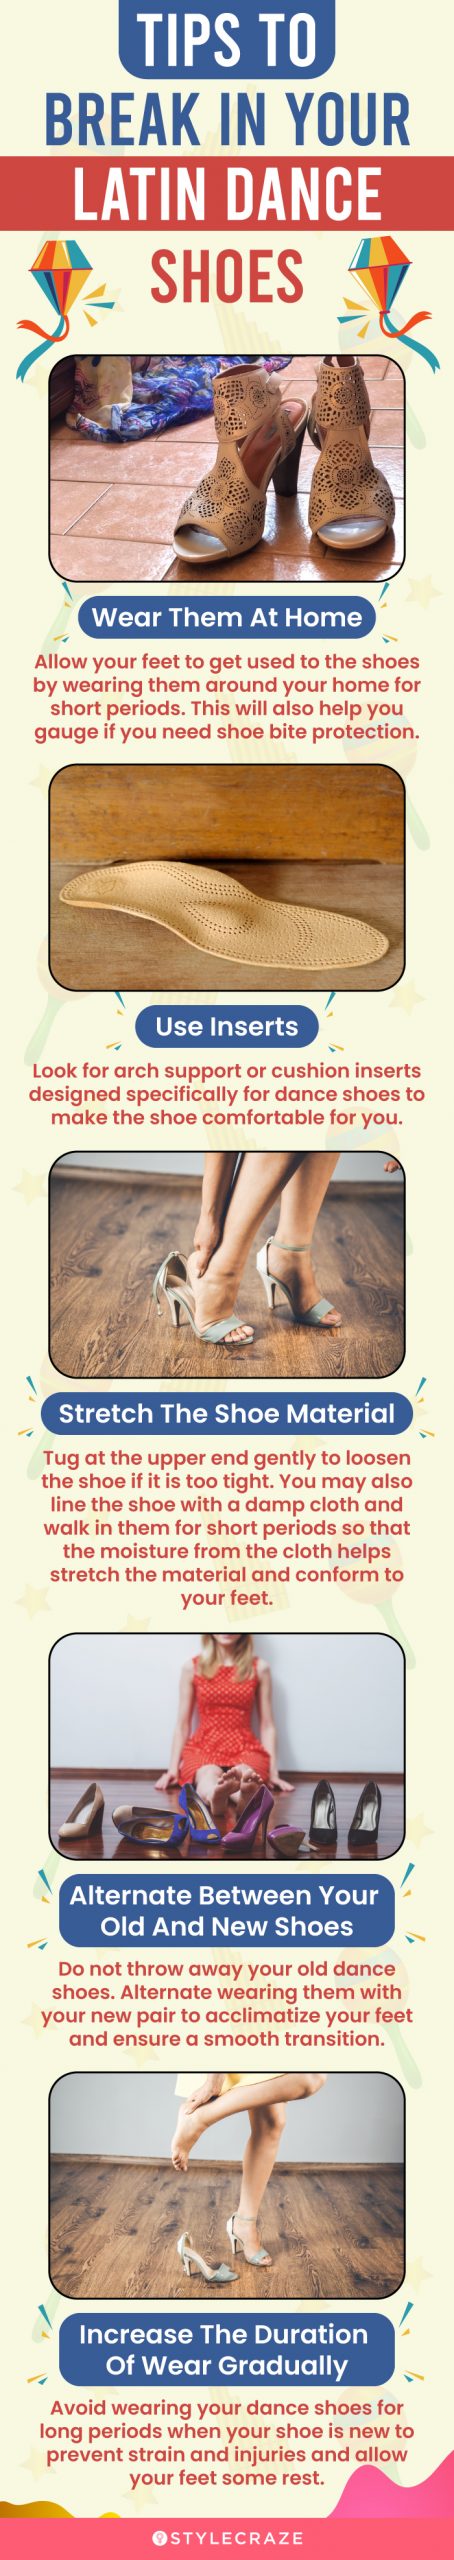 Tips To Break In Your Latin Dance Shoes (infographic)